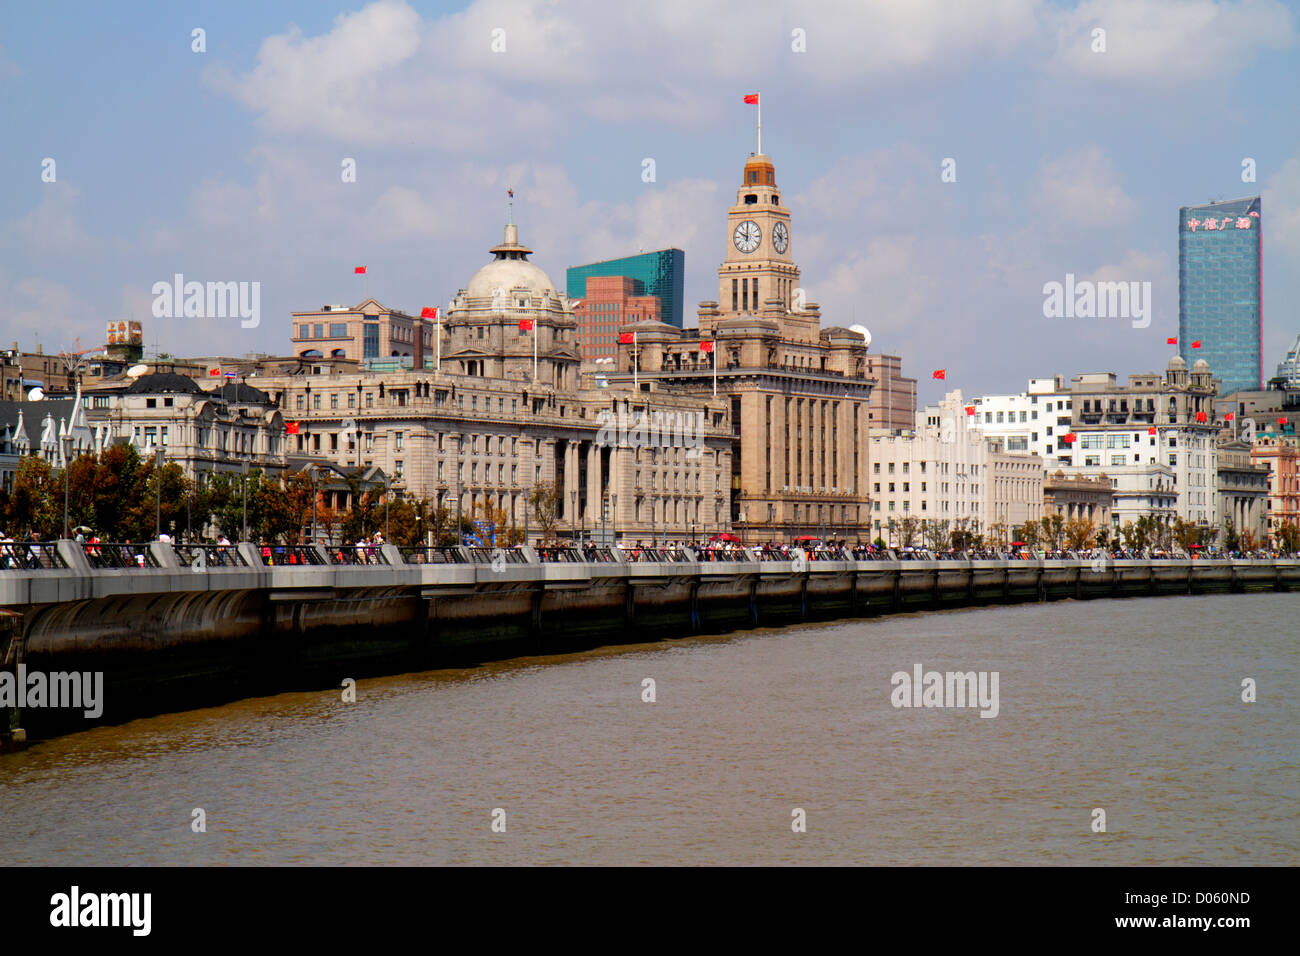 Shanghai China,Chinese Huangpu River,Jinling East Road Dongchang Road Ferry,view from,The Bund,Art Deco Neo Classical style buildings,city skyline,Hon Stock Photo